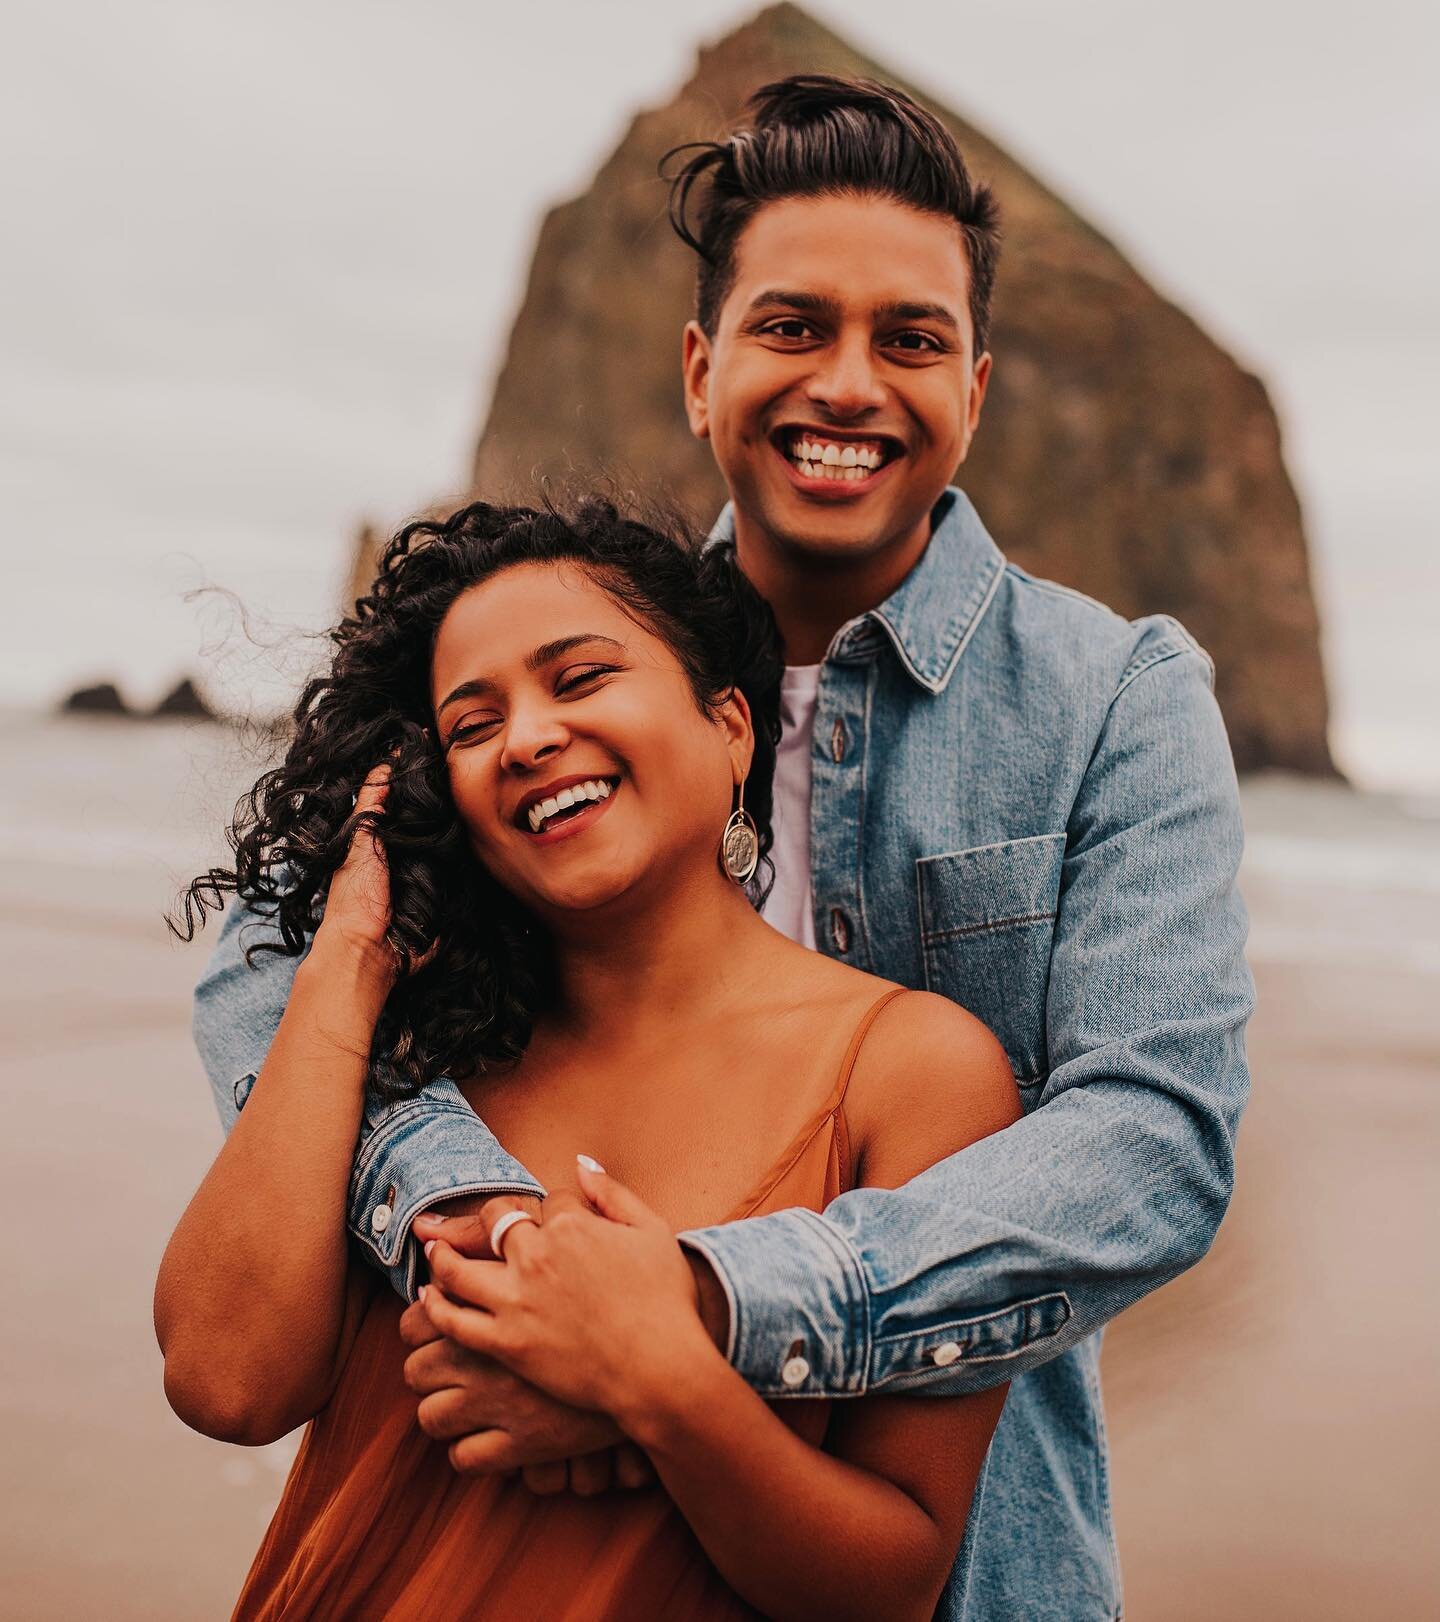 A beautiful overcast day at Cannon Beach spent with my Giveaway winners @clarisaface &amp; @funkydunkle ! 🥰 How freaking adorable are these two together?! 🧡